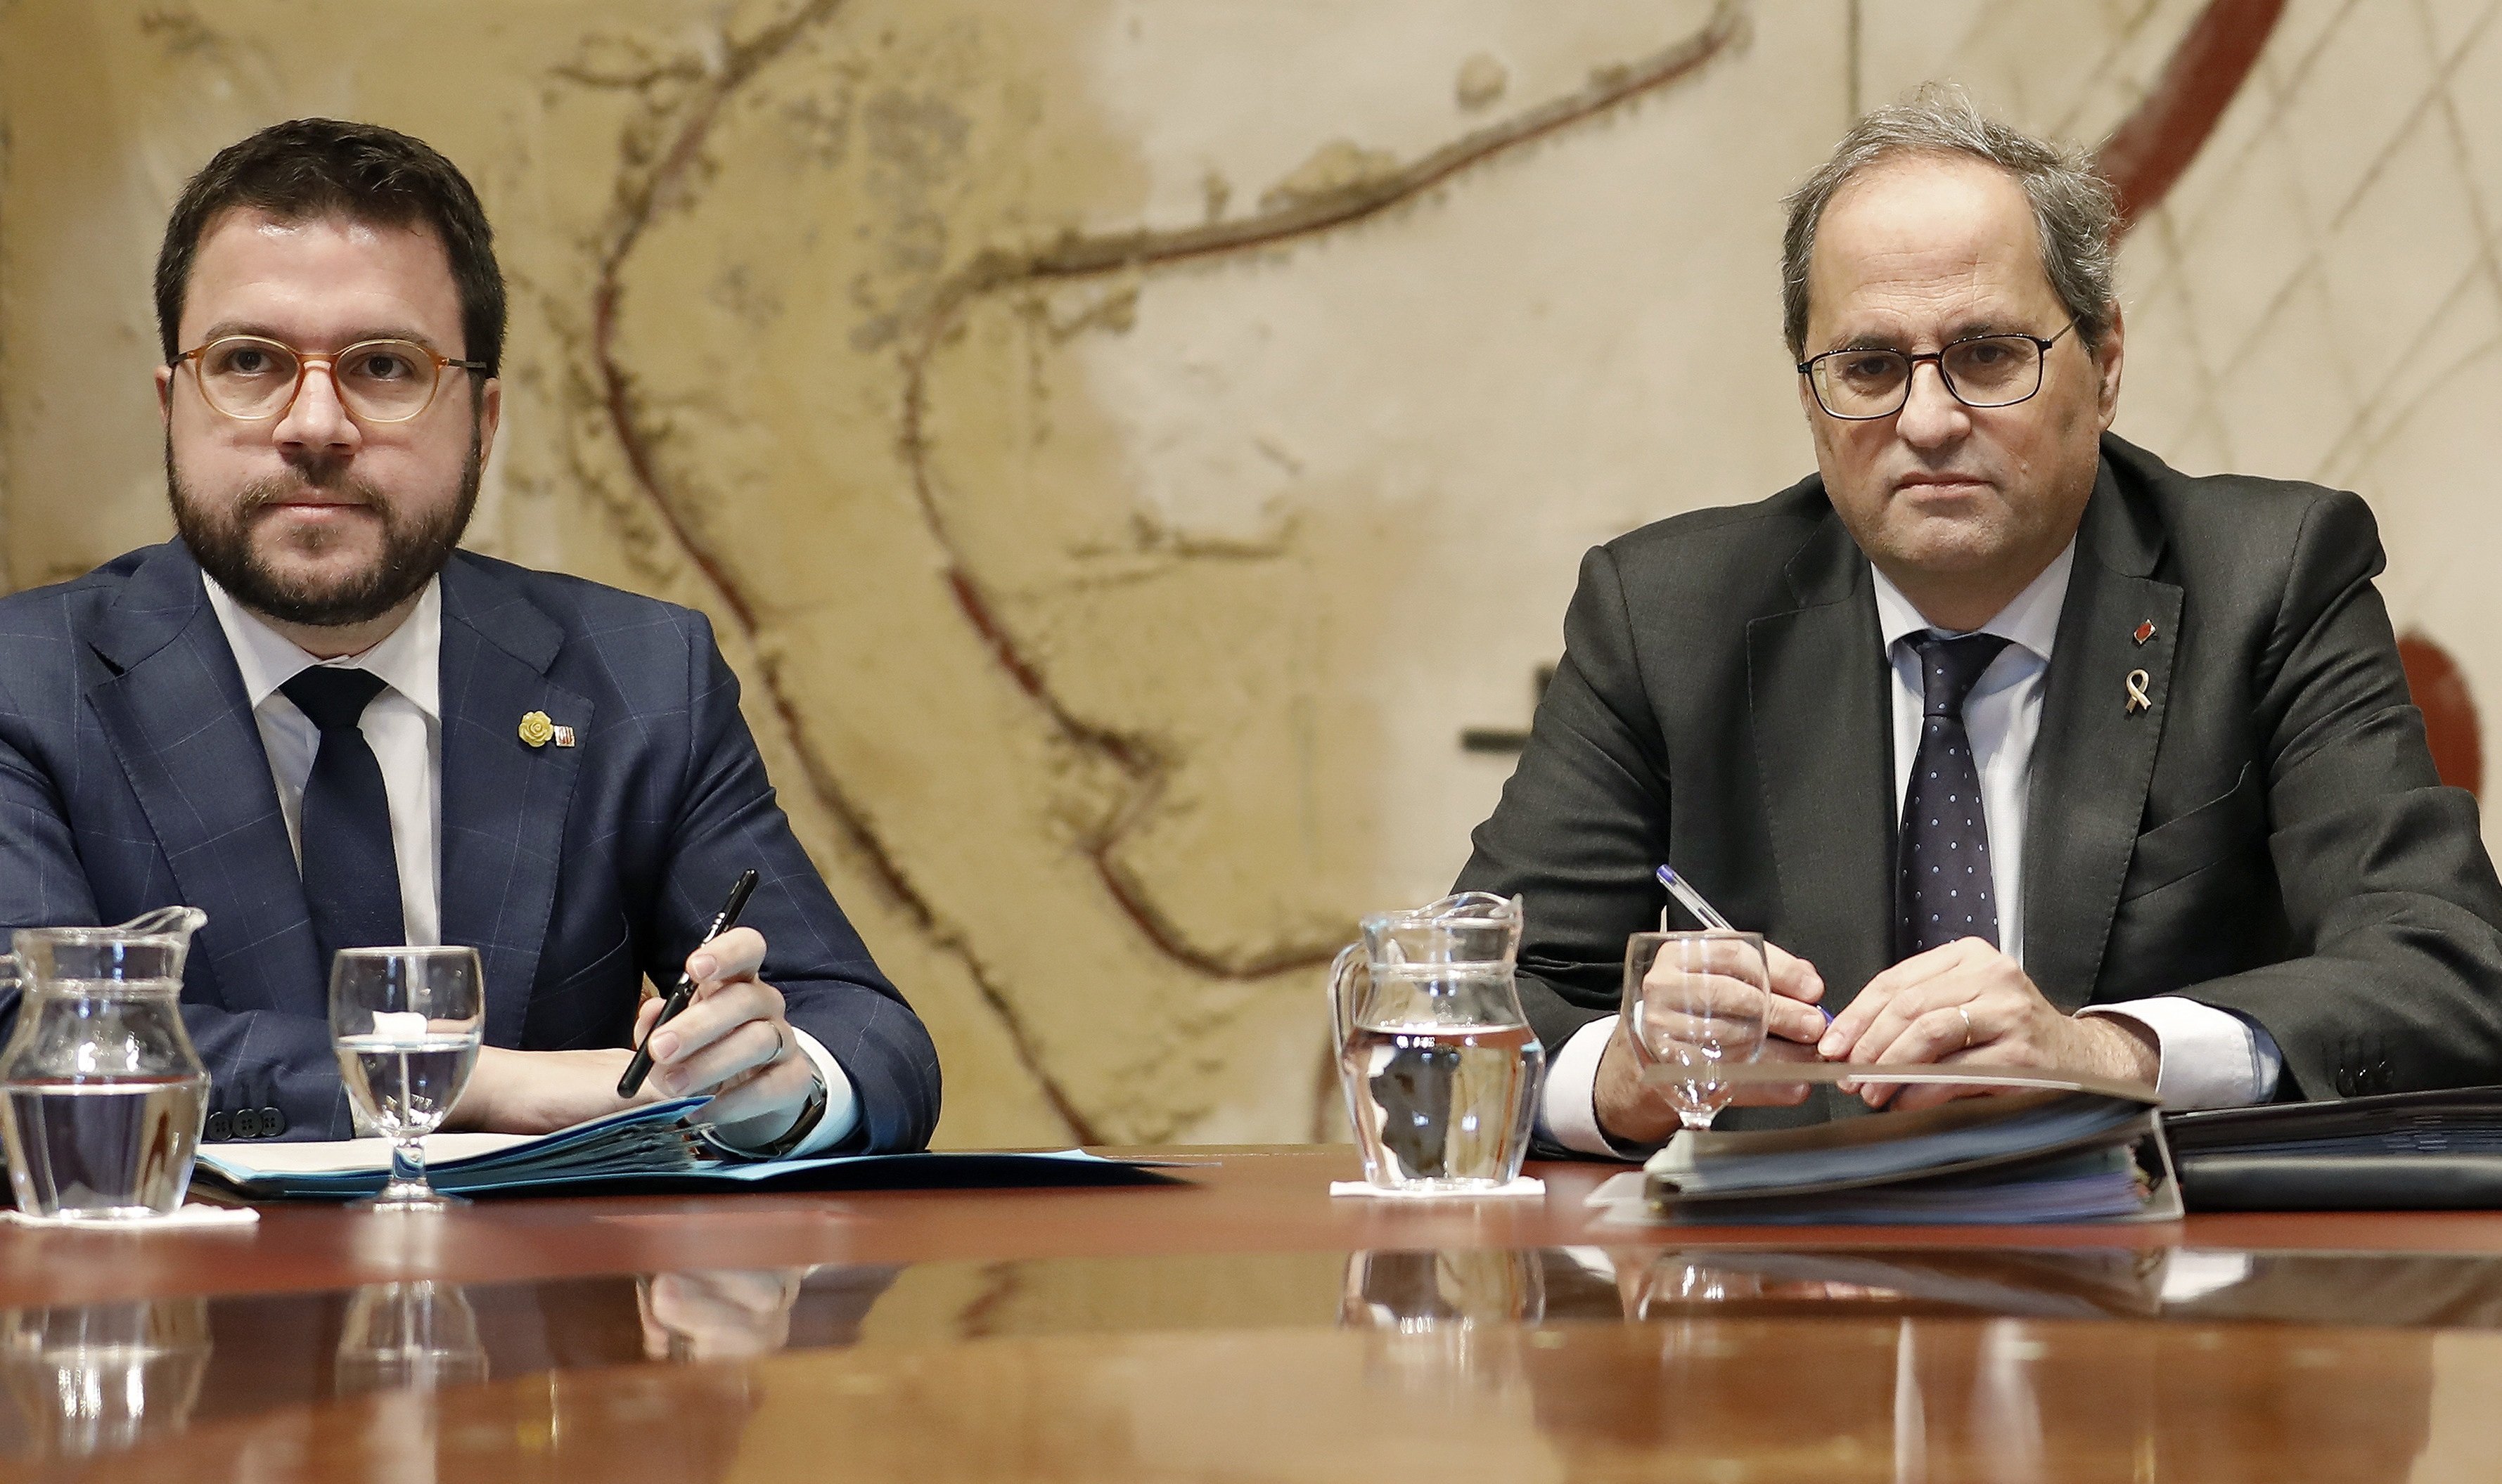 Torra: "Unsustainable pressure" being exerted on Catalan Parliament to act against him